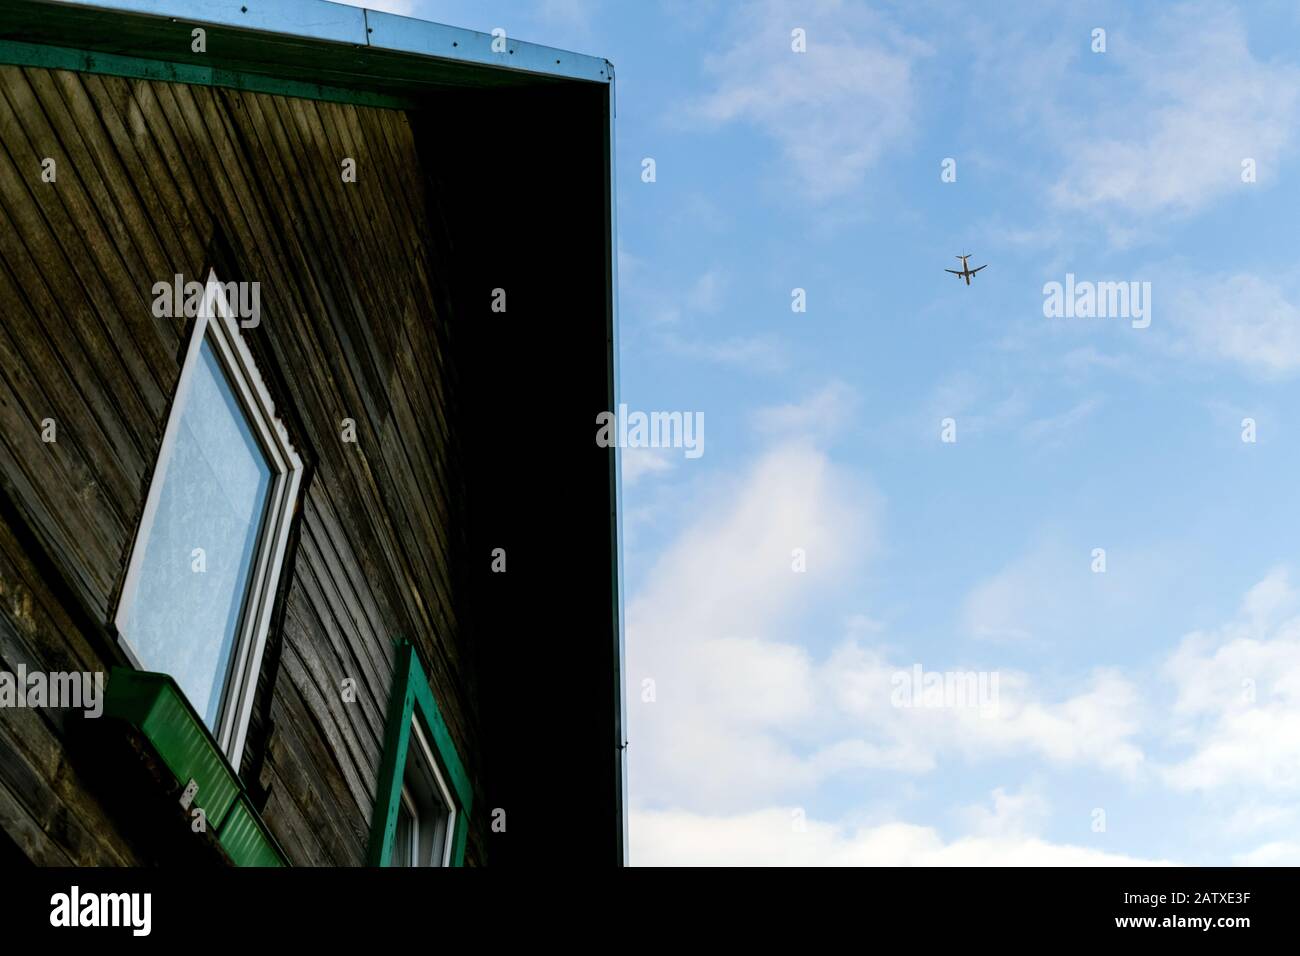 Airplane flying above old house Stock Photo